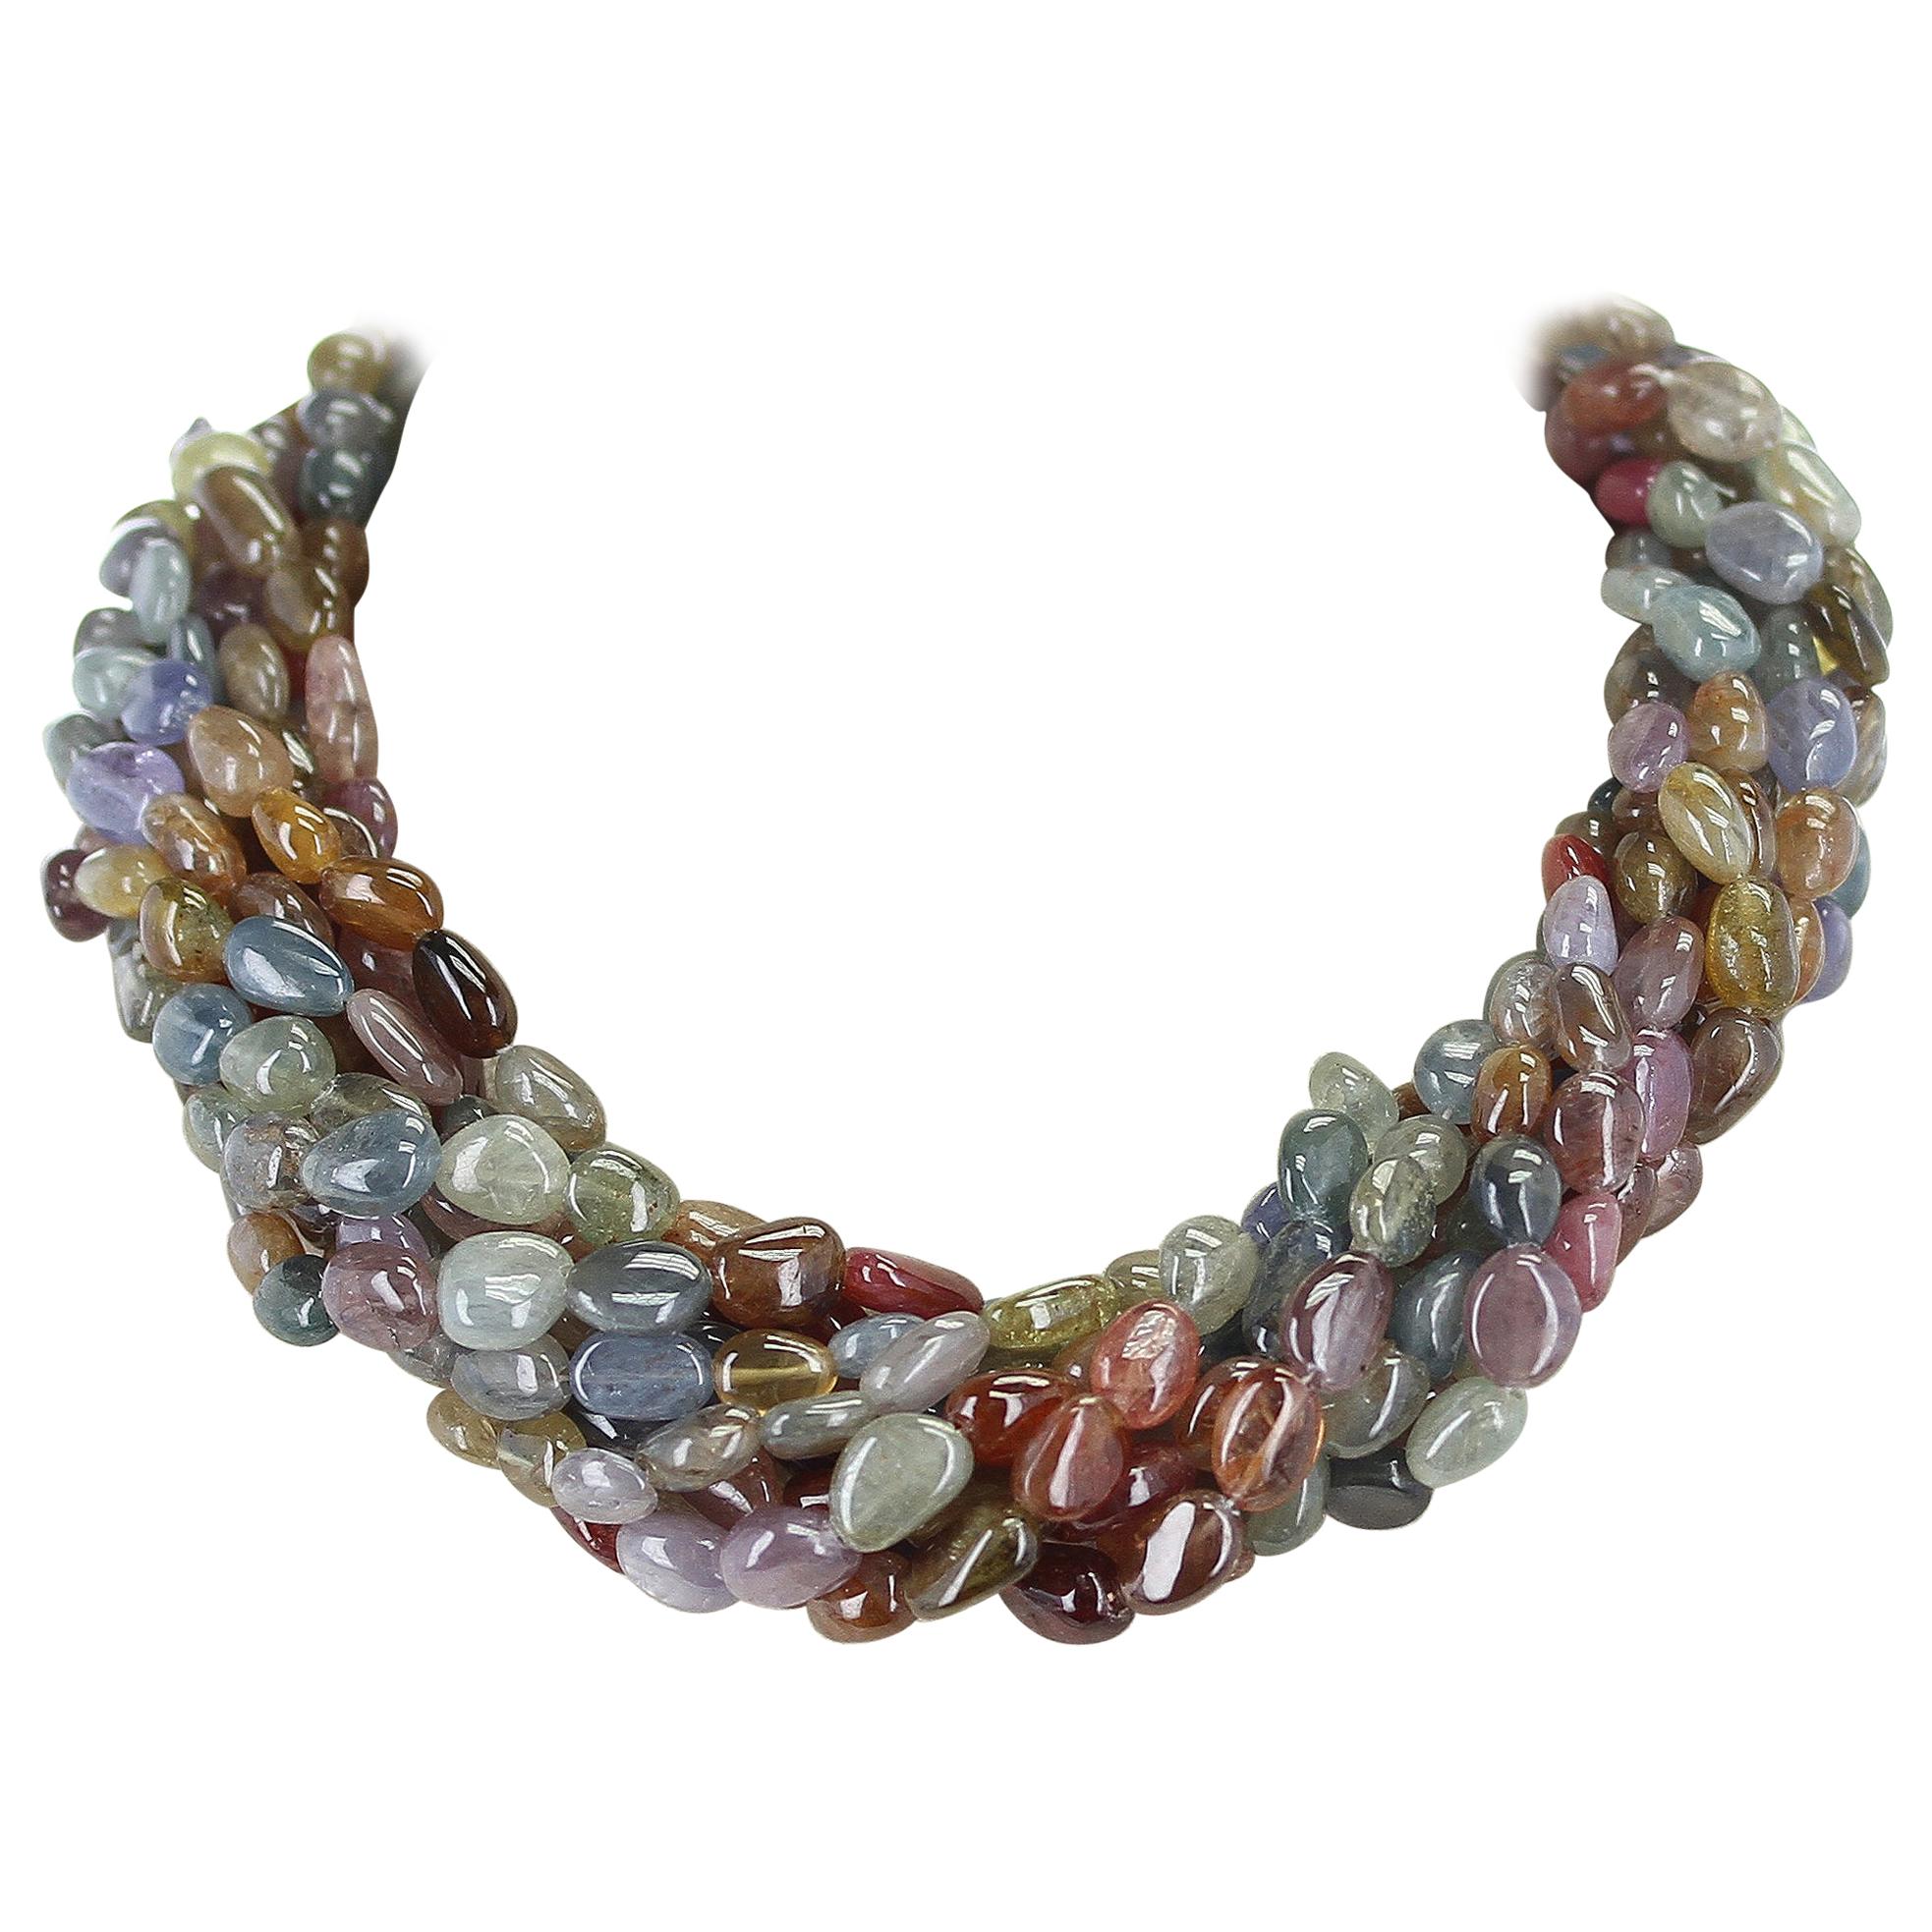 1460 Carat Genuine & Natural Earthy Multi-Sapphire Tumbled Bead Choker Necklace For Sale